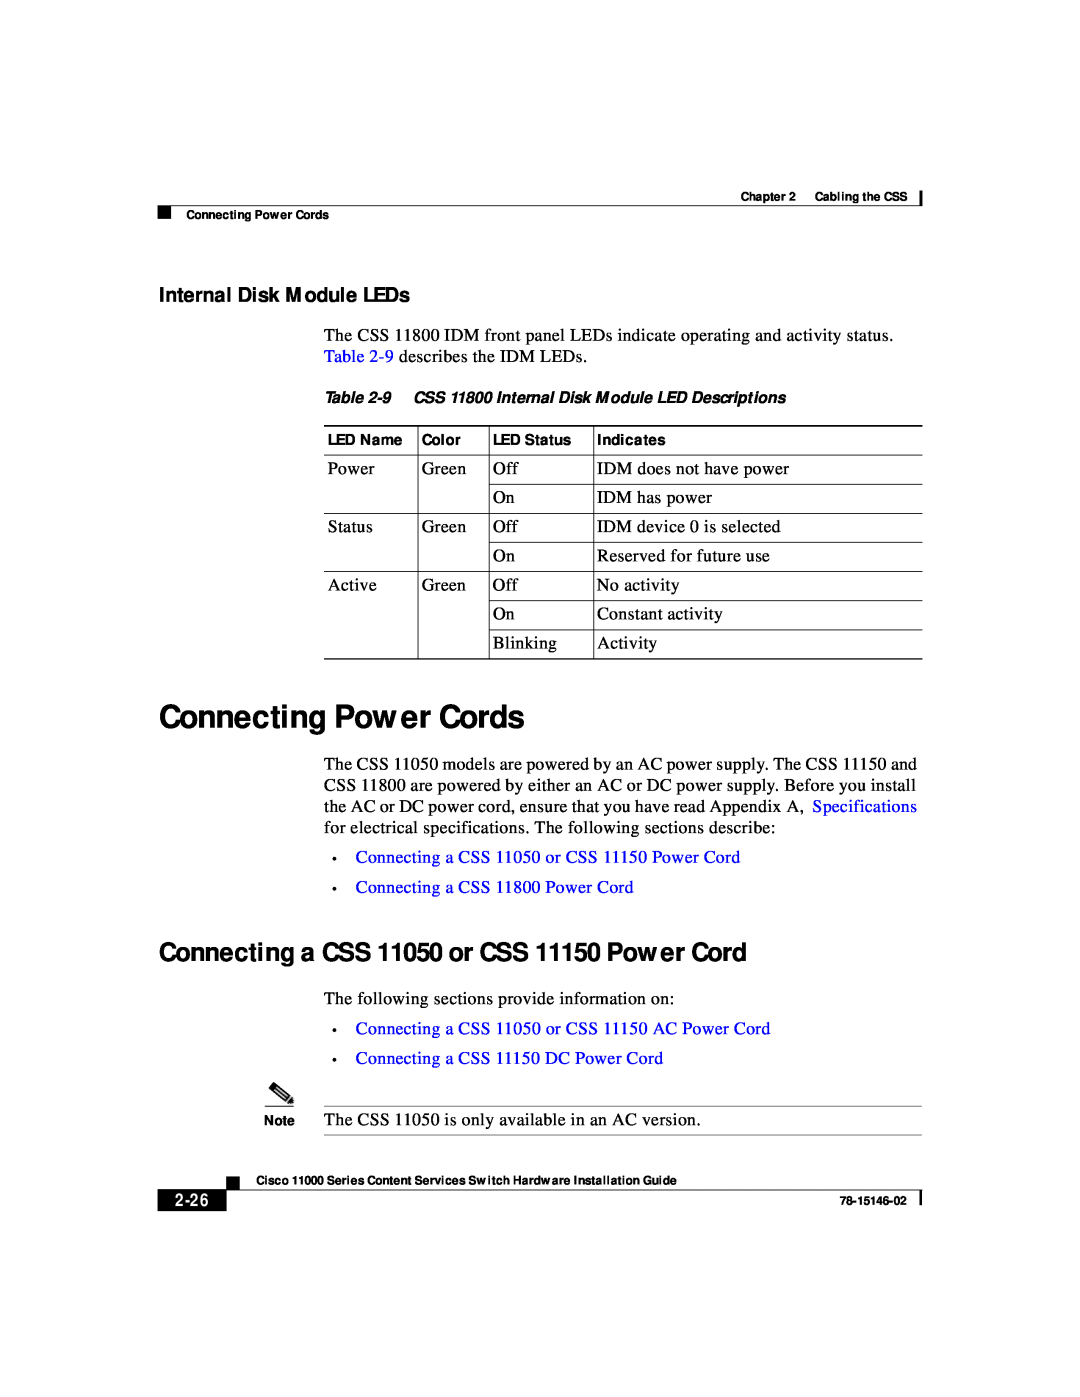 Cisco Systems 11000 Series manual Connecting Power Cords, Connecting a CSS 11050 or CSS 11150 Power Cord, 2-26 